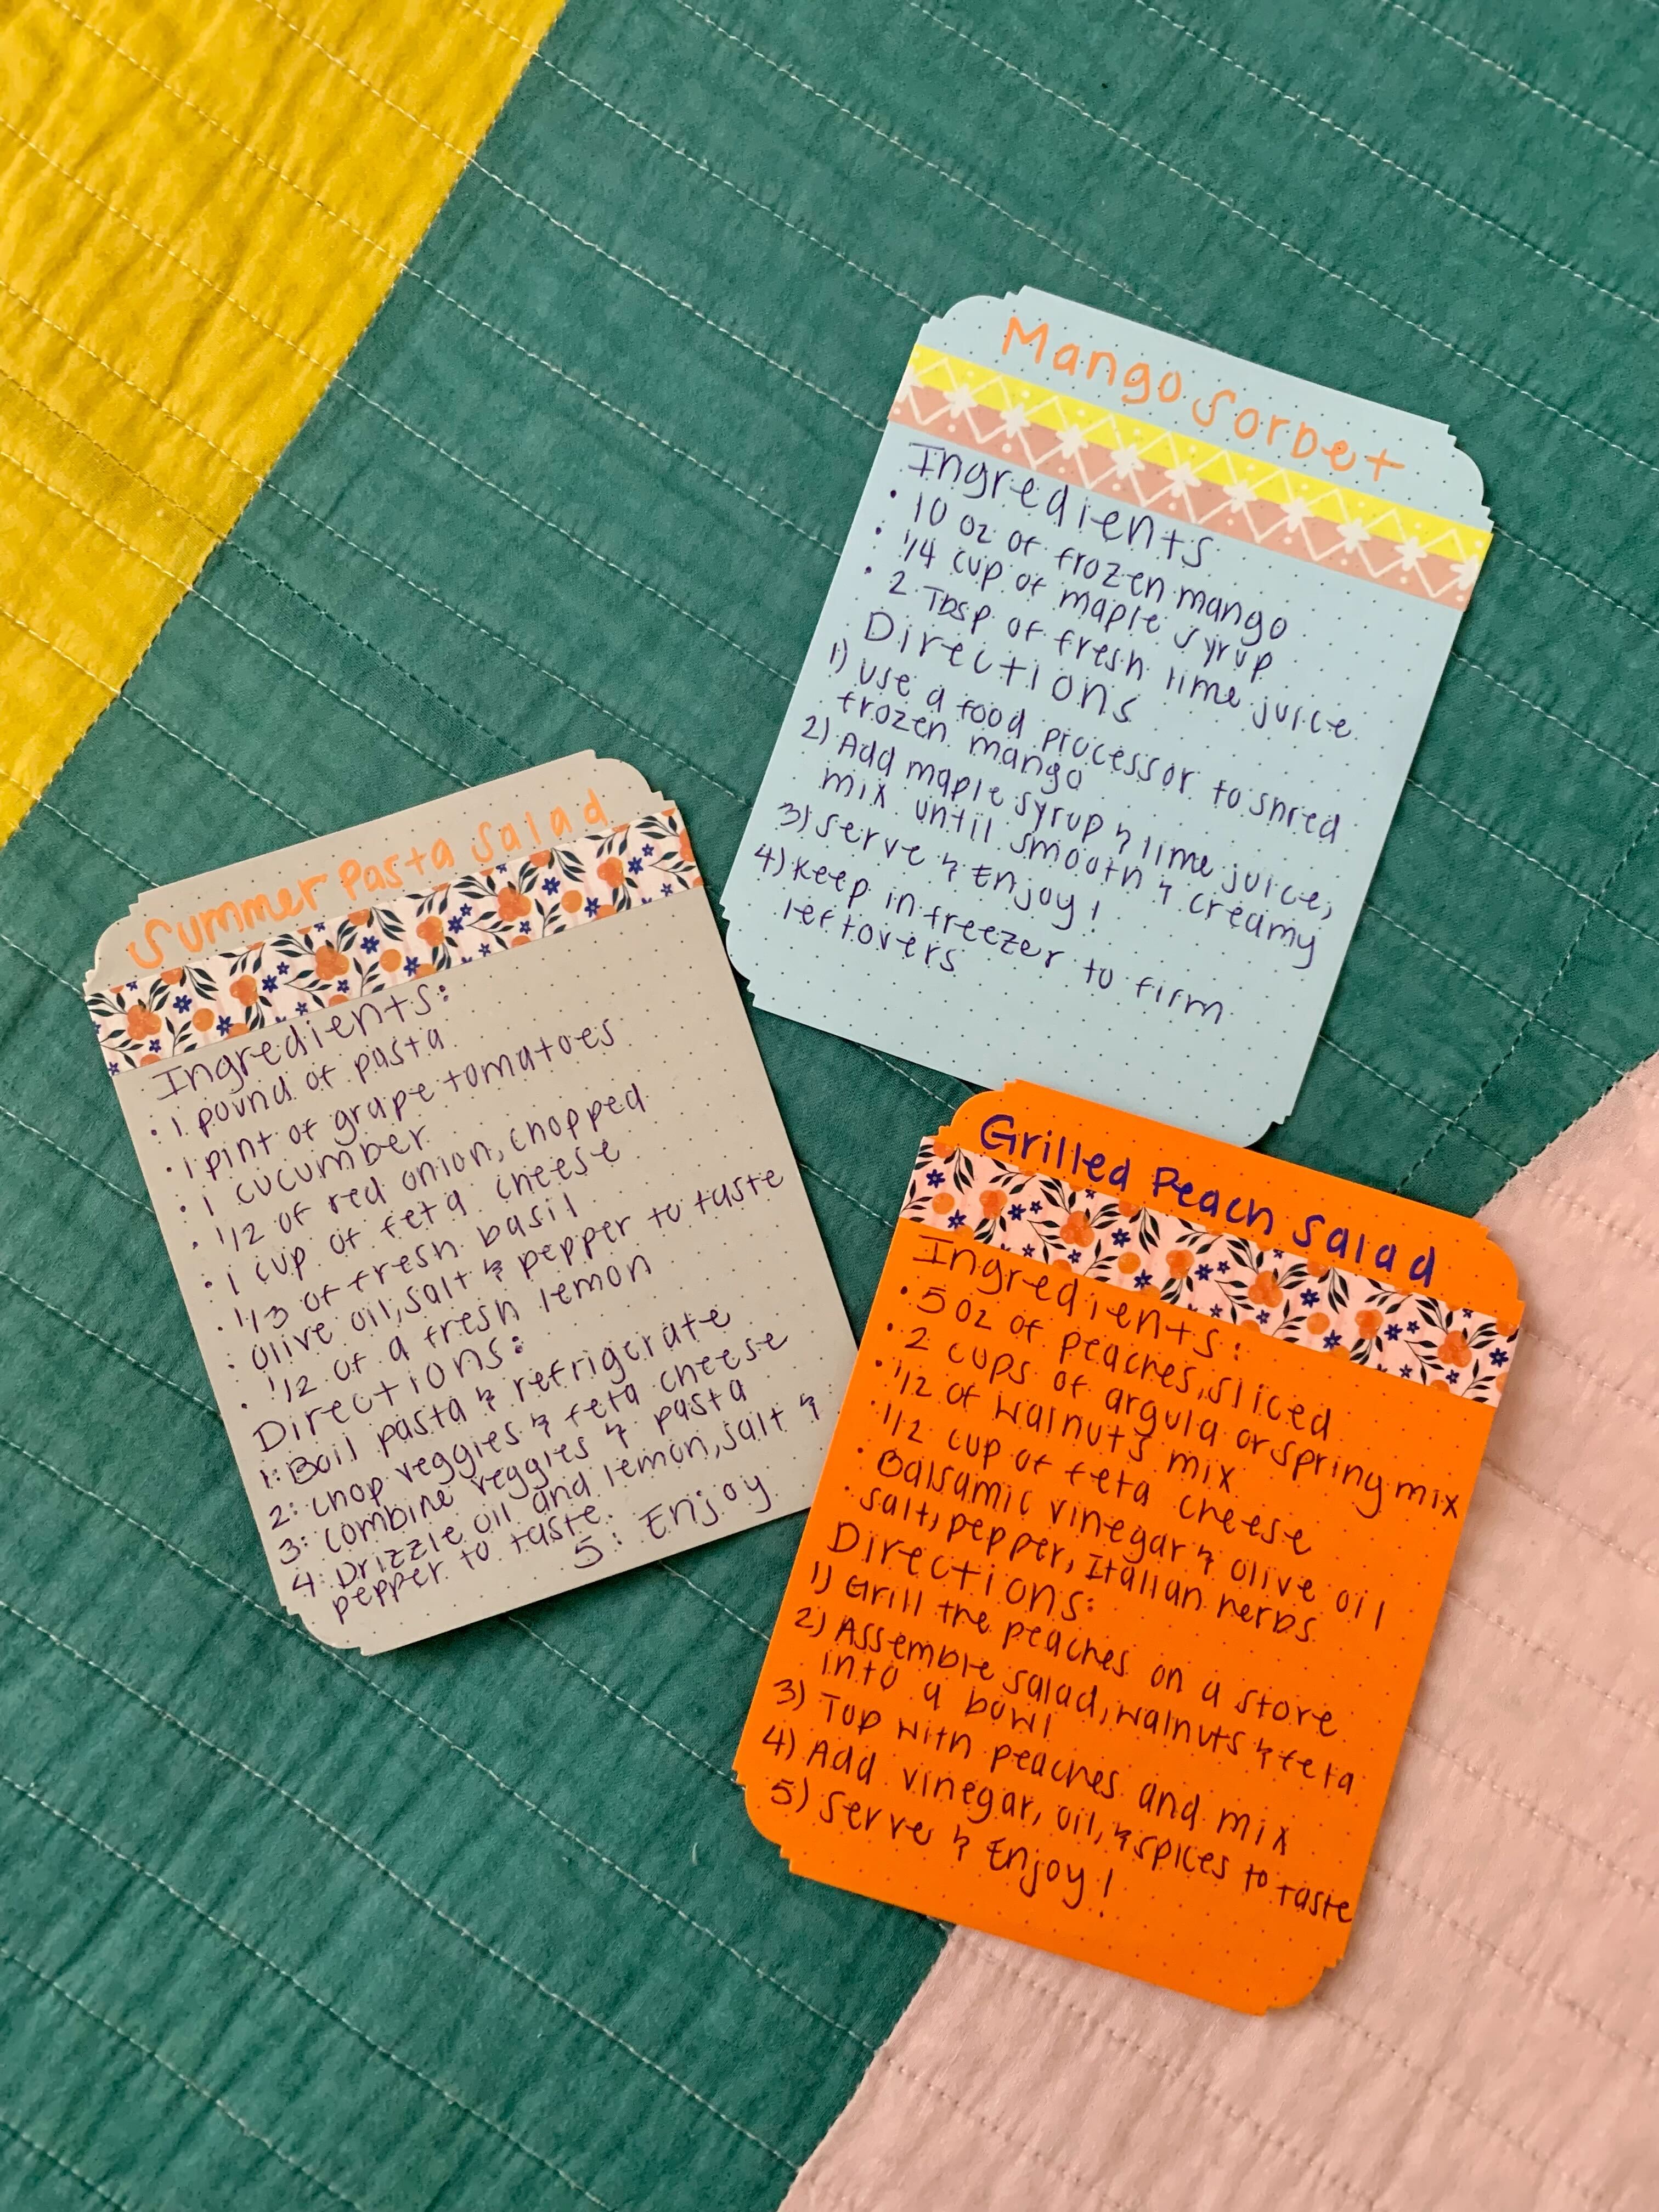 image of 3 recipe cards for a summer pasta salad, mango sorbet, and grilled peach salad